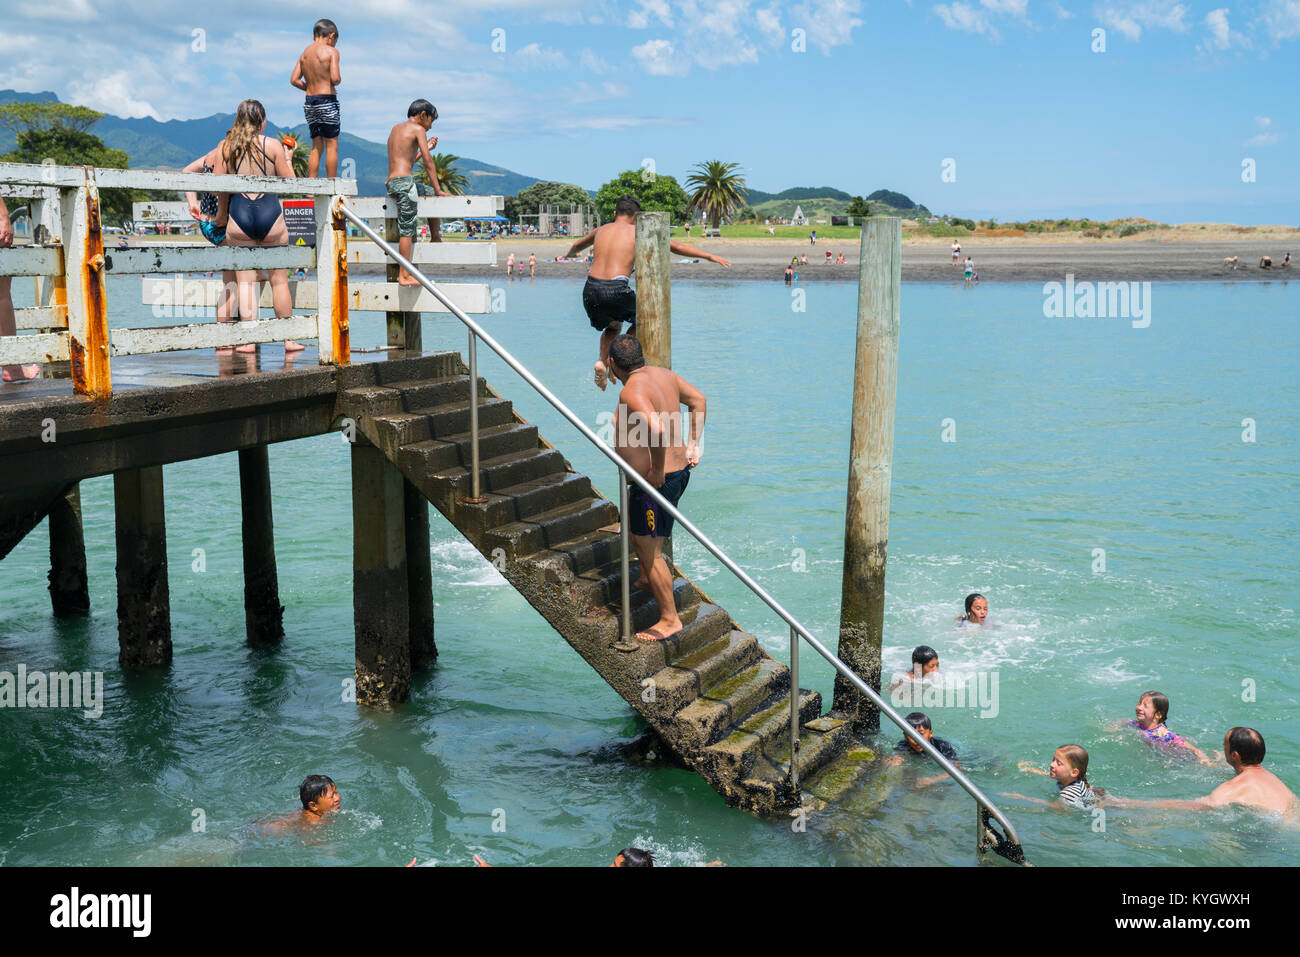 RAGLAN NEW ZEALAND - JANUARY 14, 2018; Summer fun in Raglan mostly local Maori boys jumping from the small wharf in small New Zealand town on North Is Stock Photo